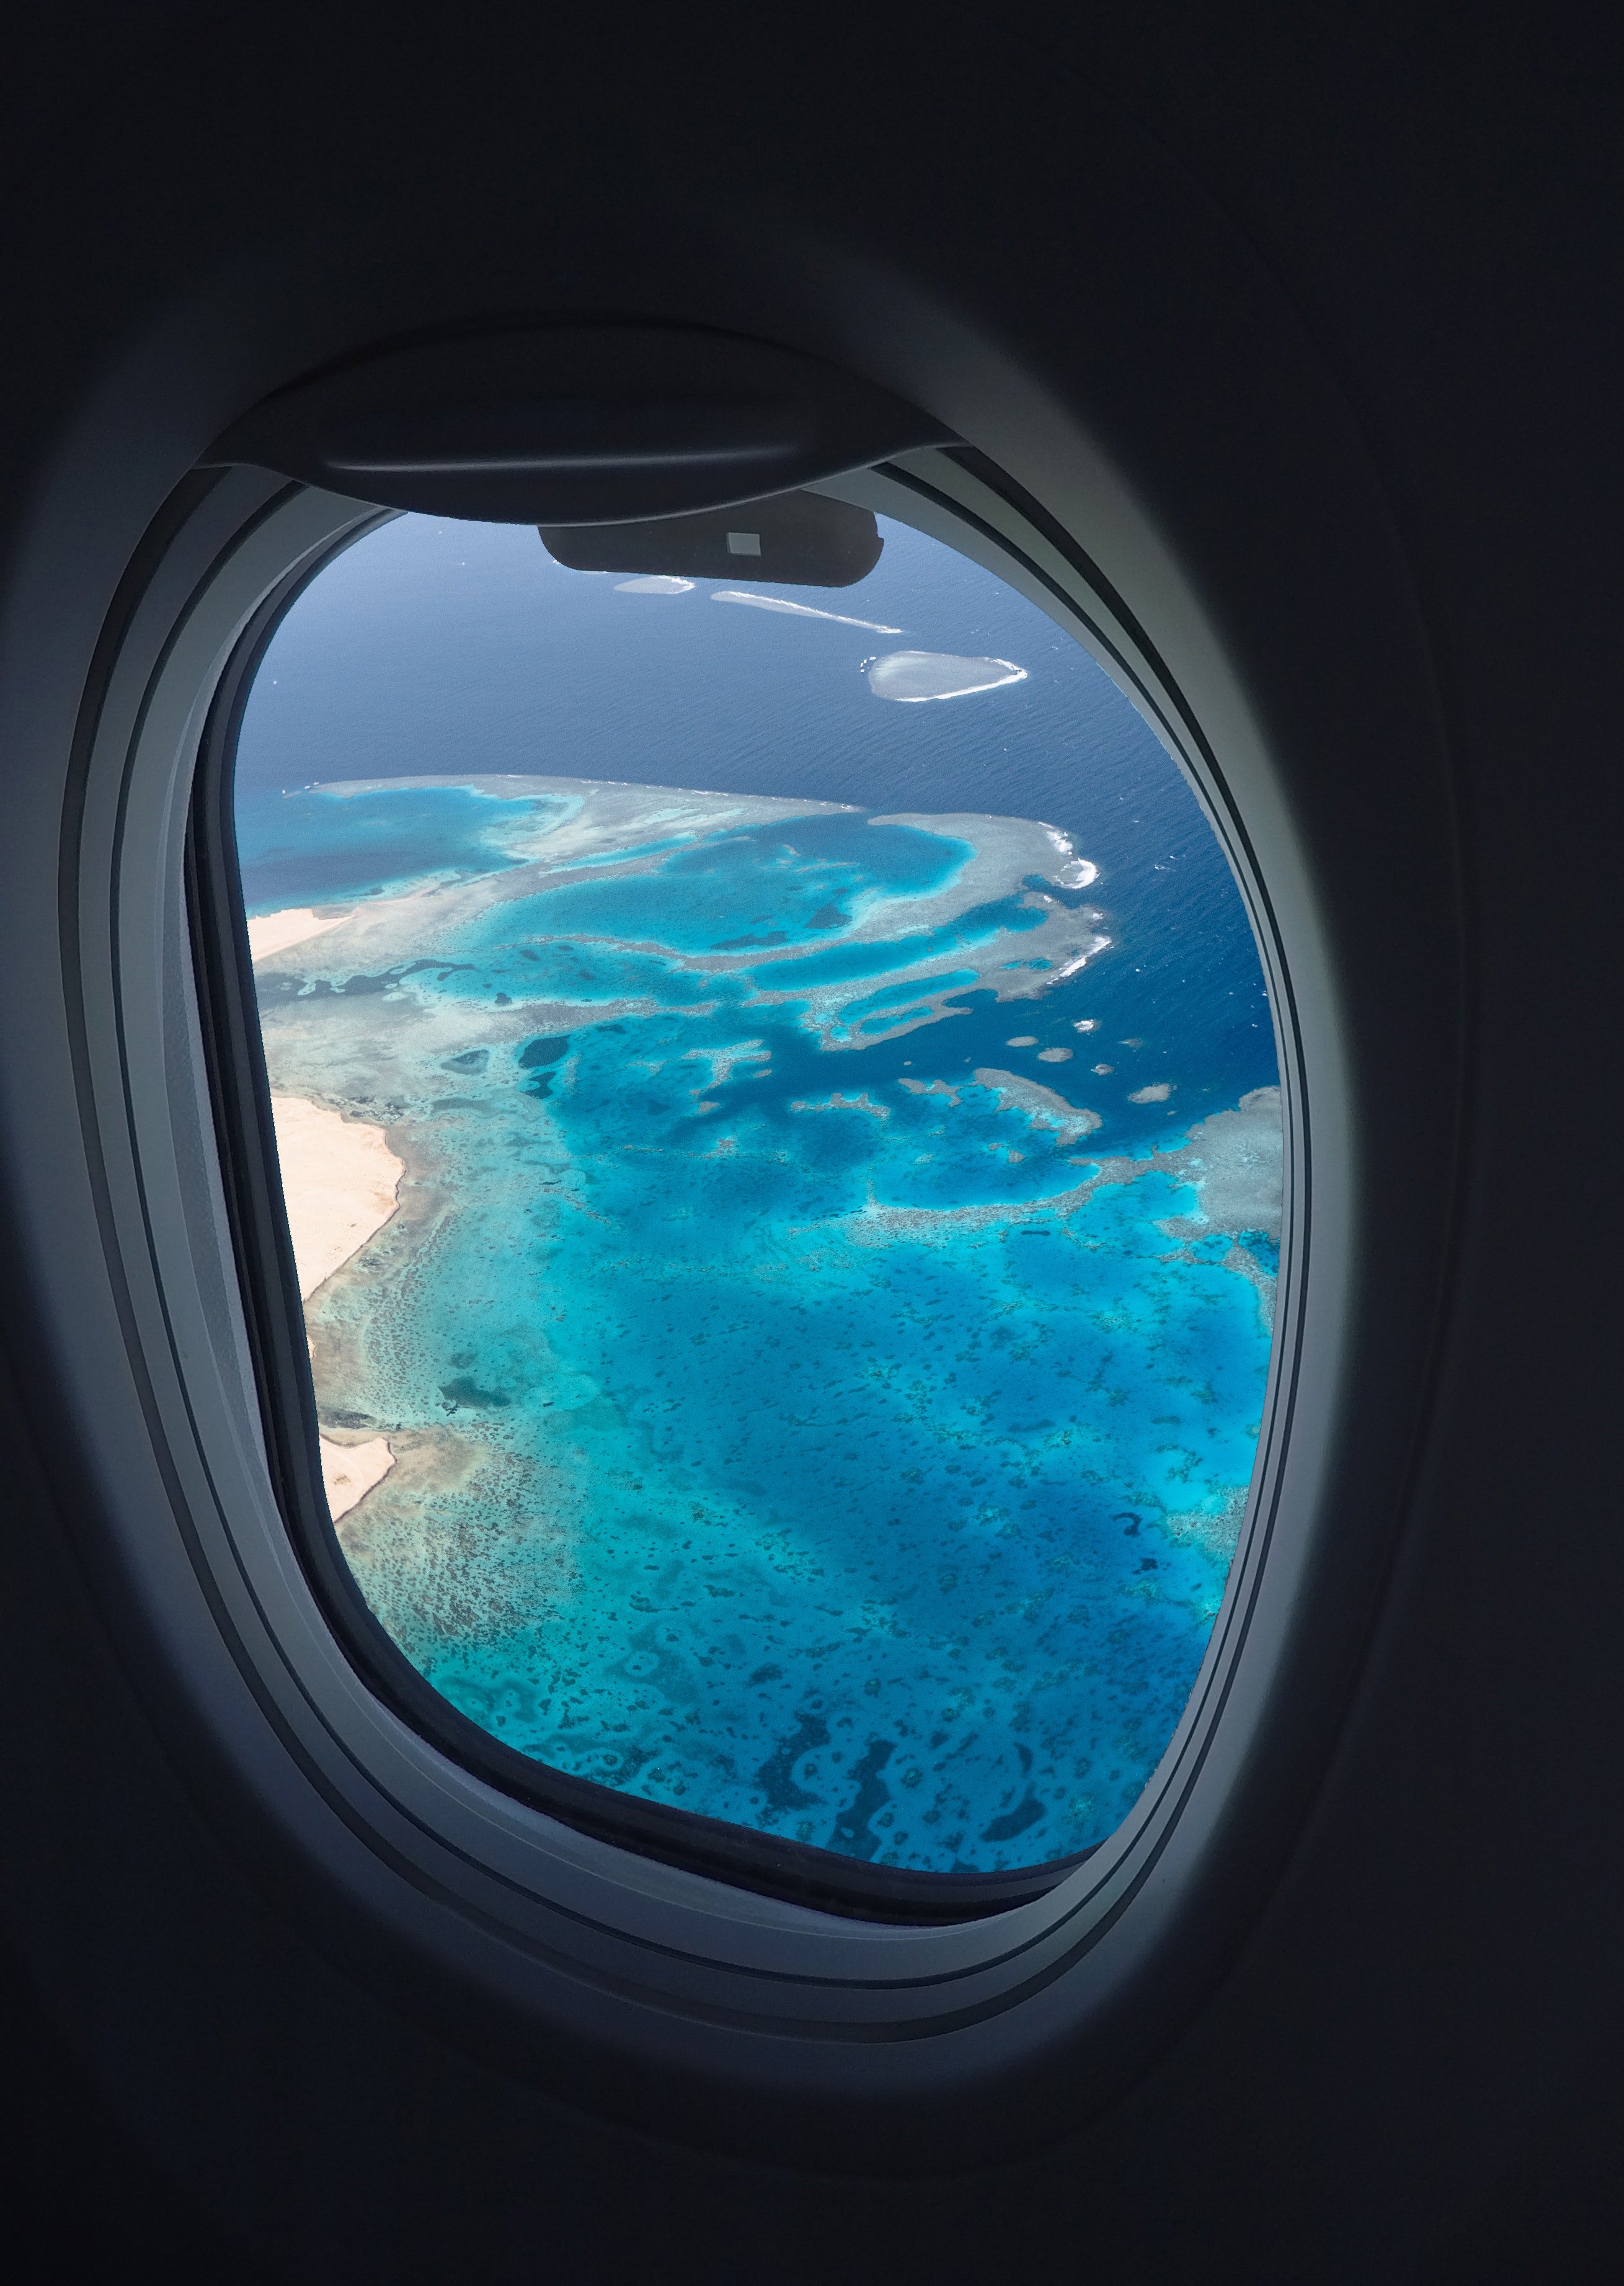 Guide For Taking Great Airplane Window Photographs. Wicked Good Travel Tips